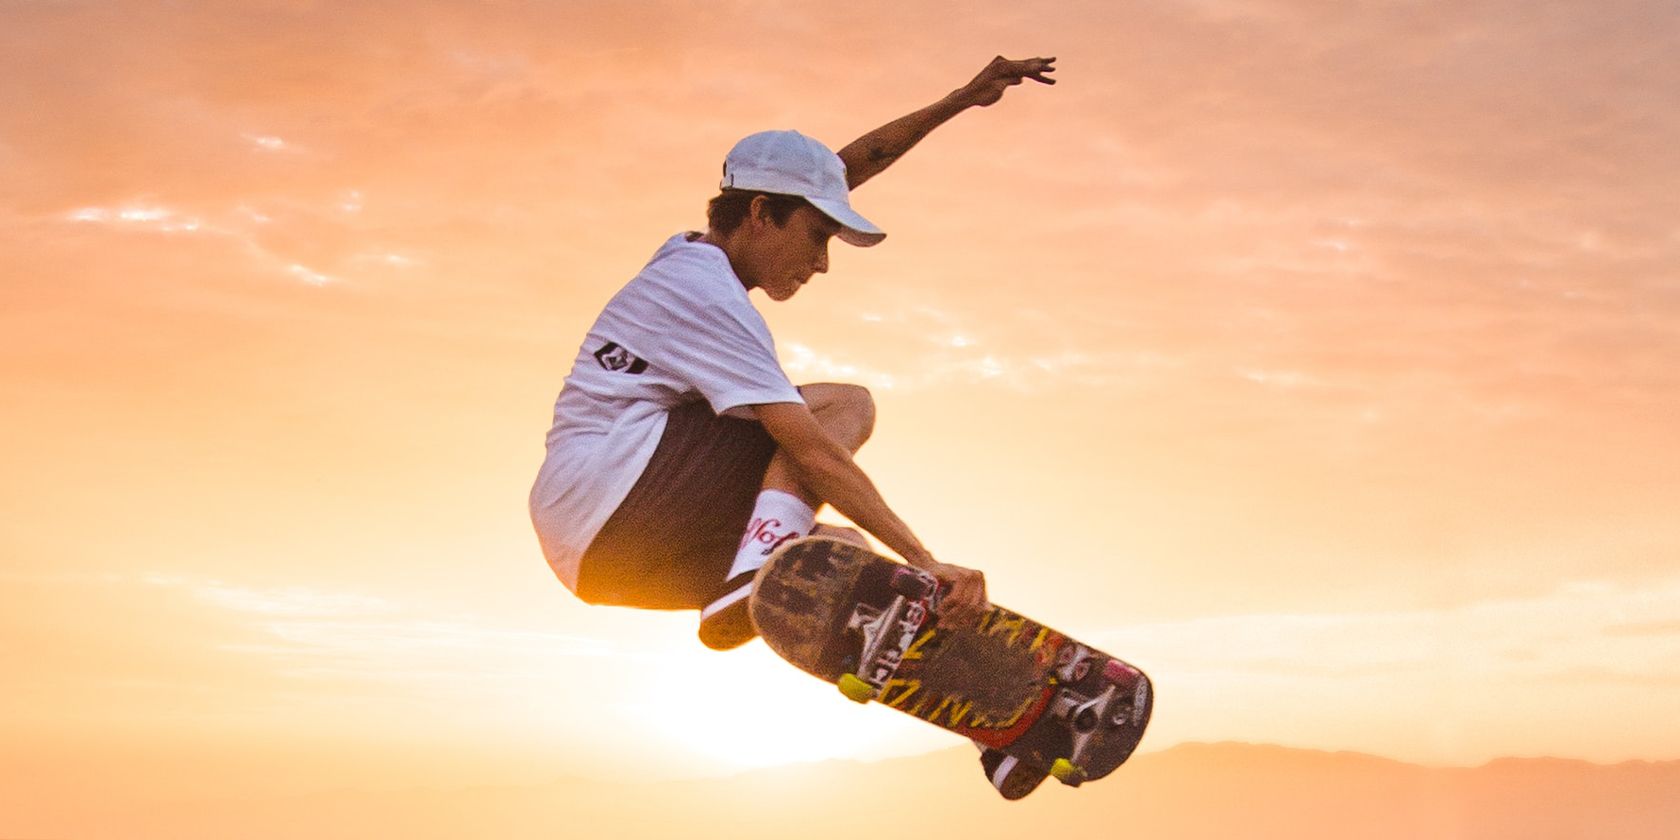 Top 10 Best Offline Skate Games for Android and iOS that you need to play!  